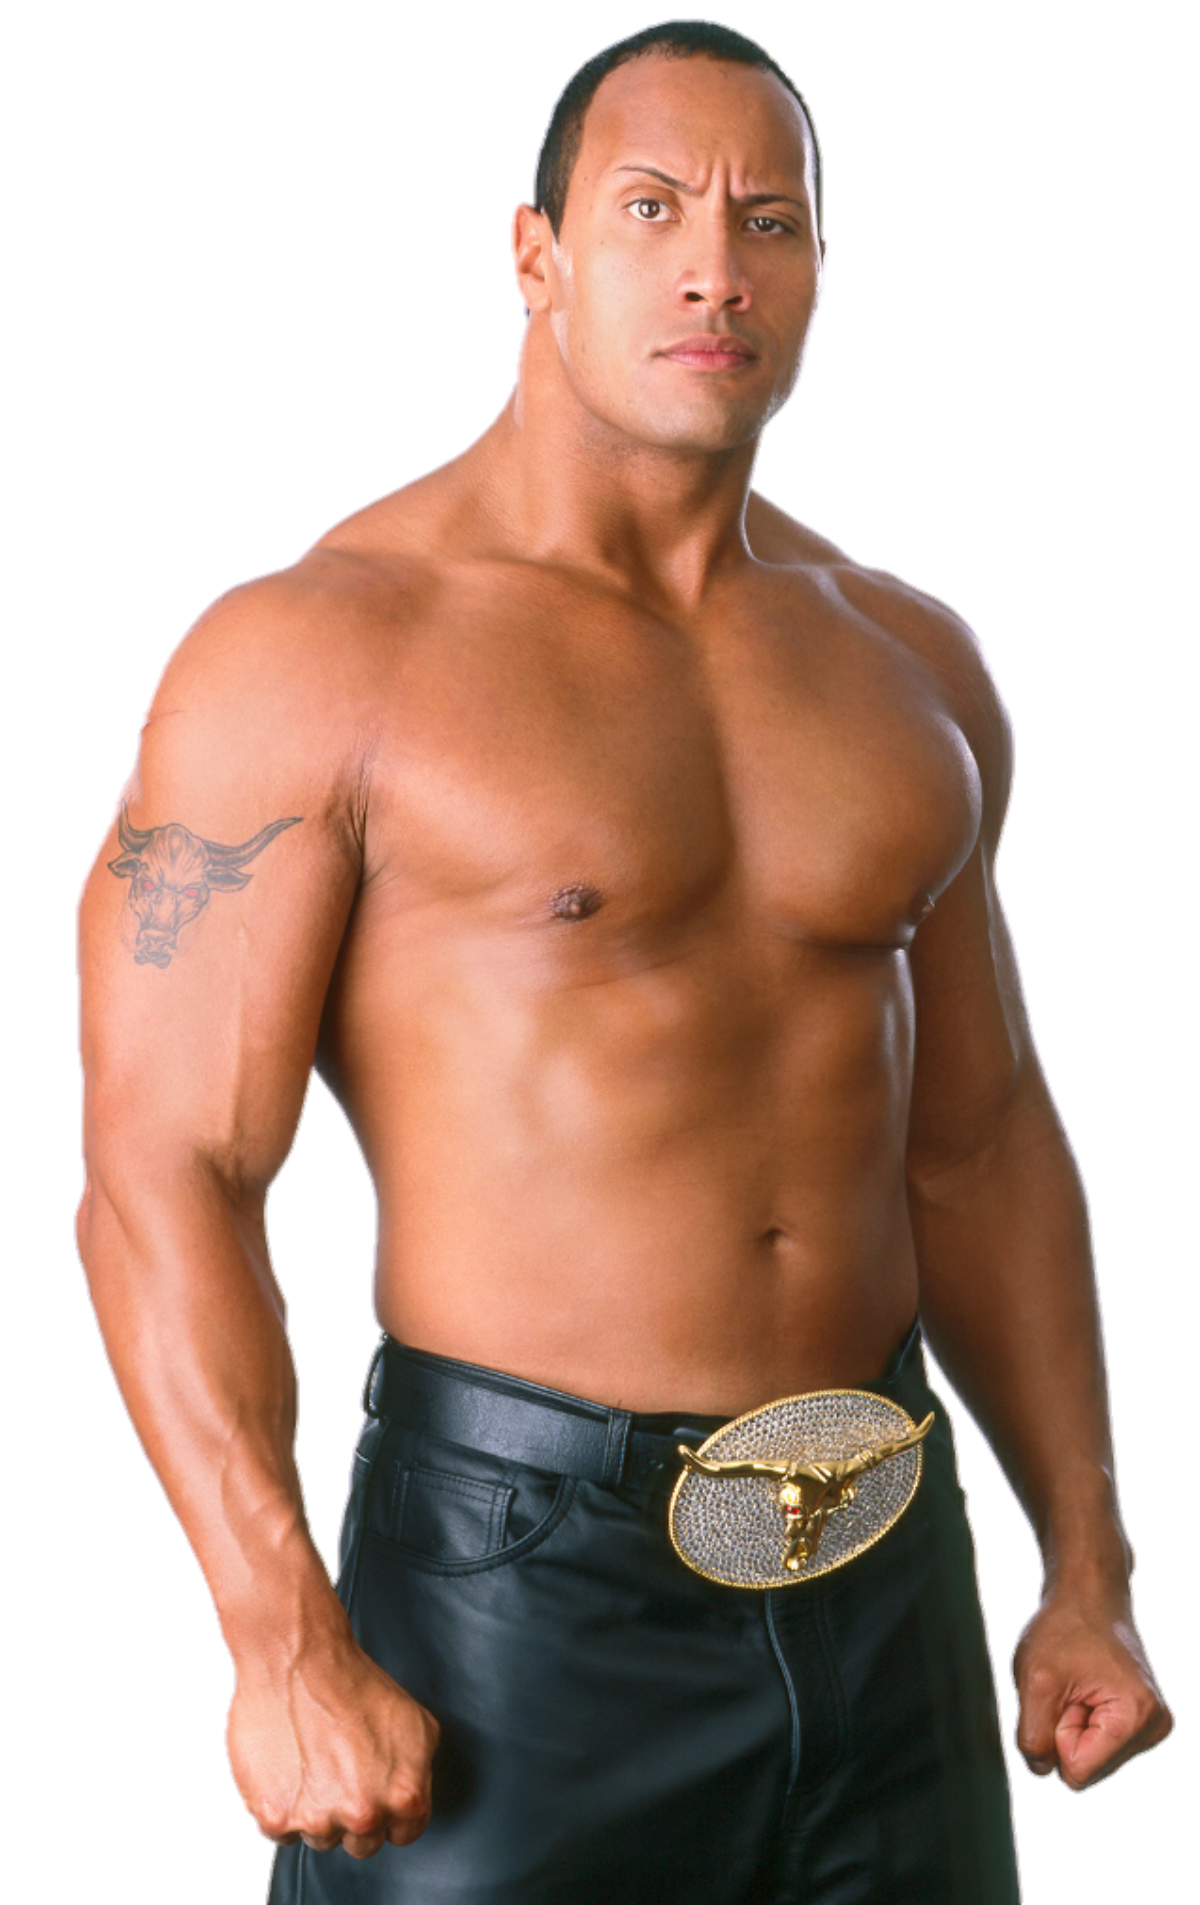 The Rock - WWE - Image Abyss